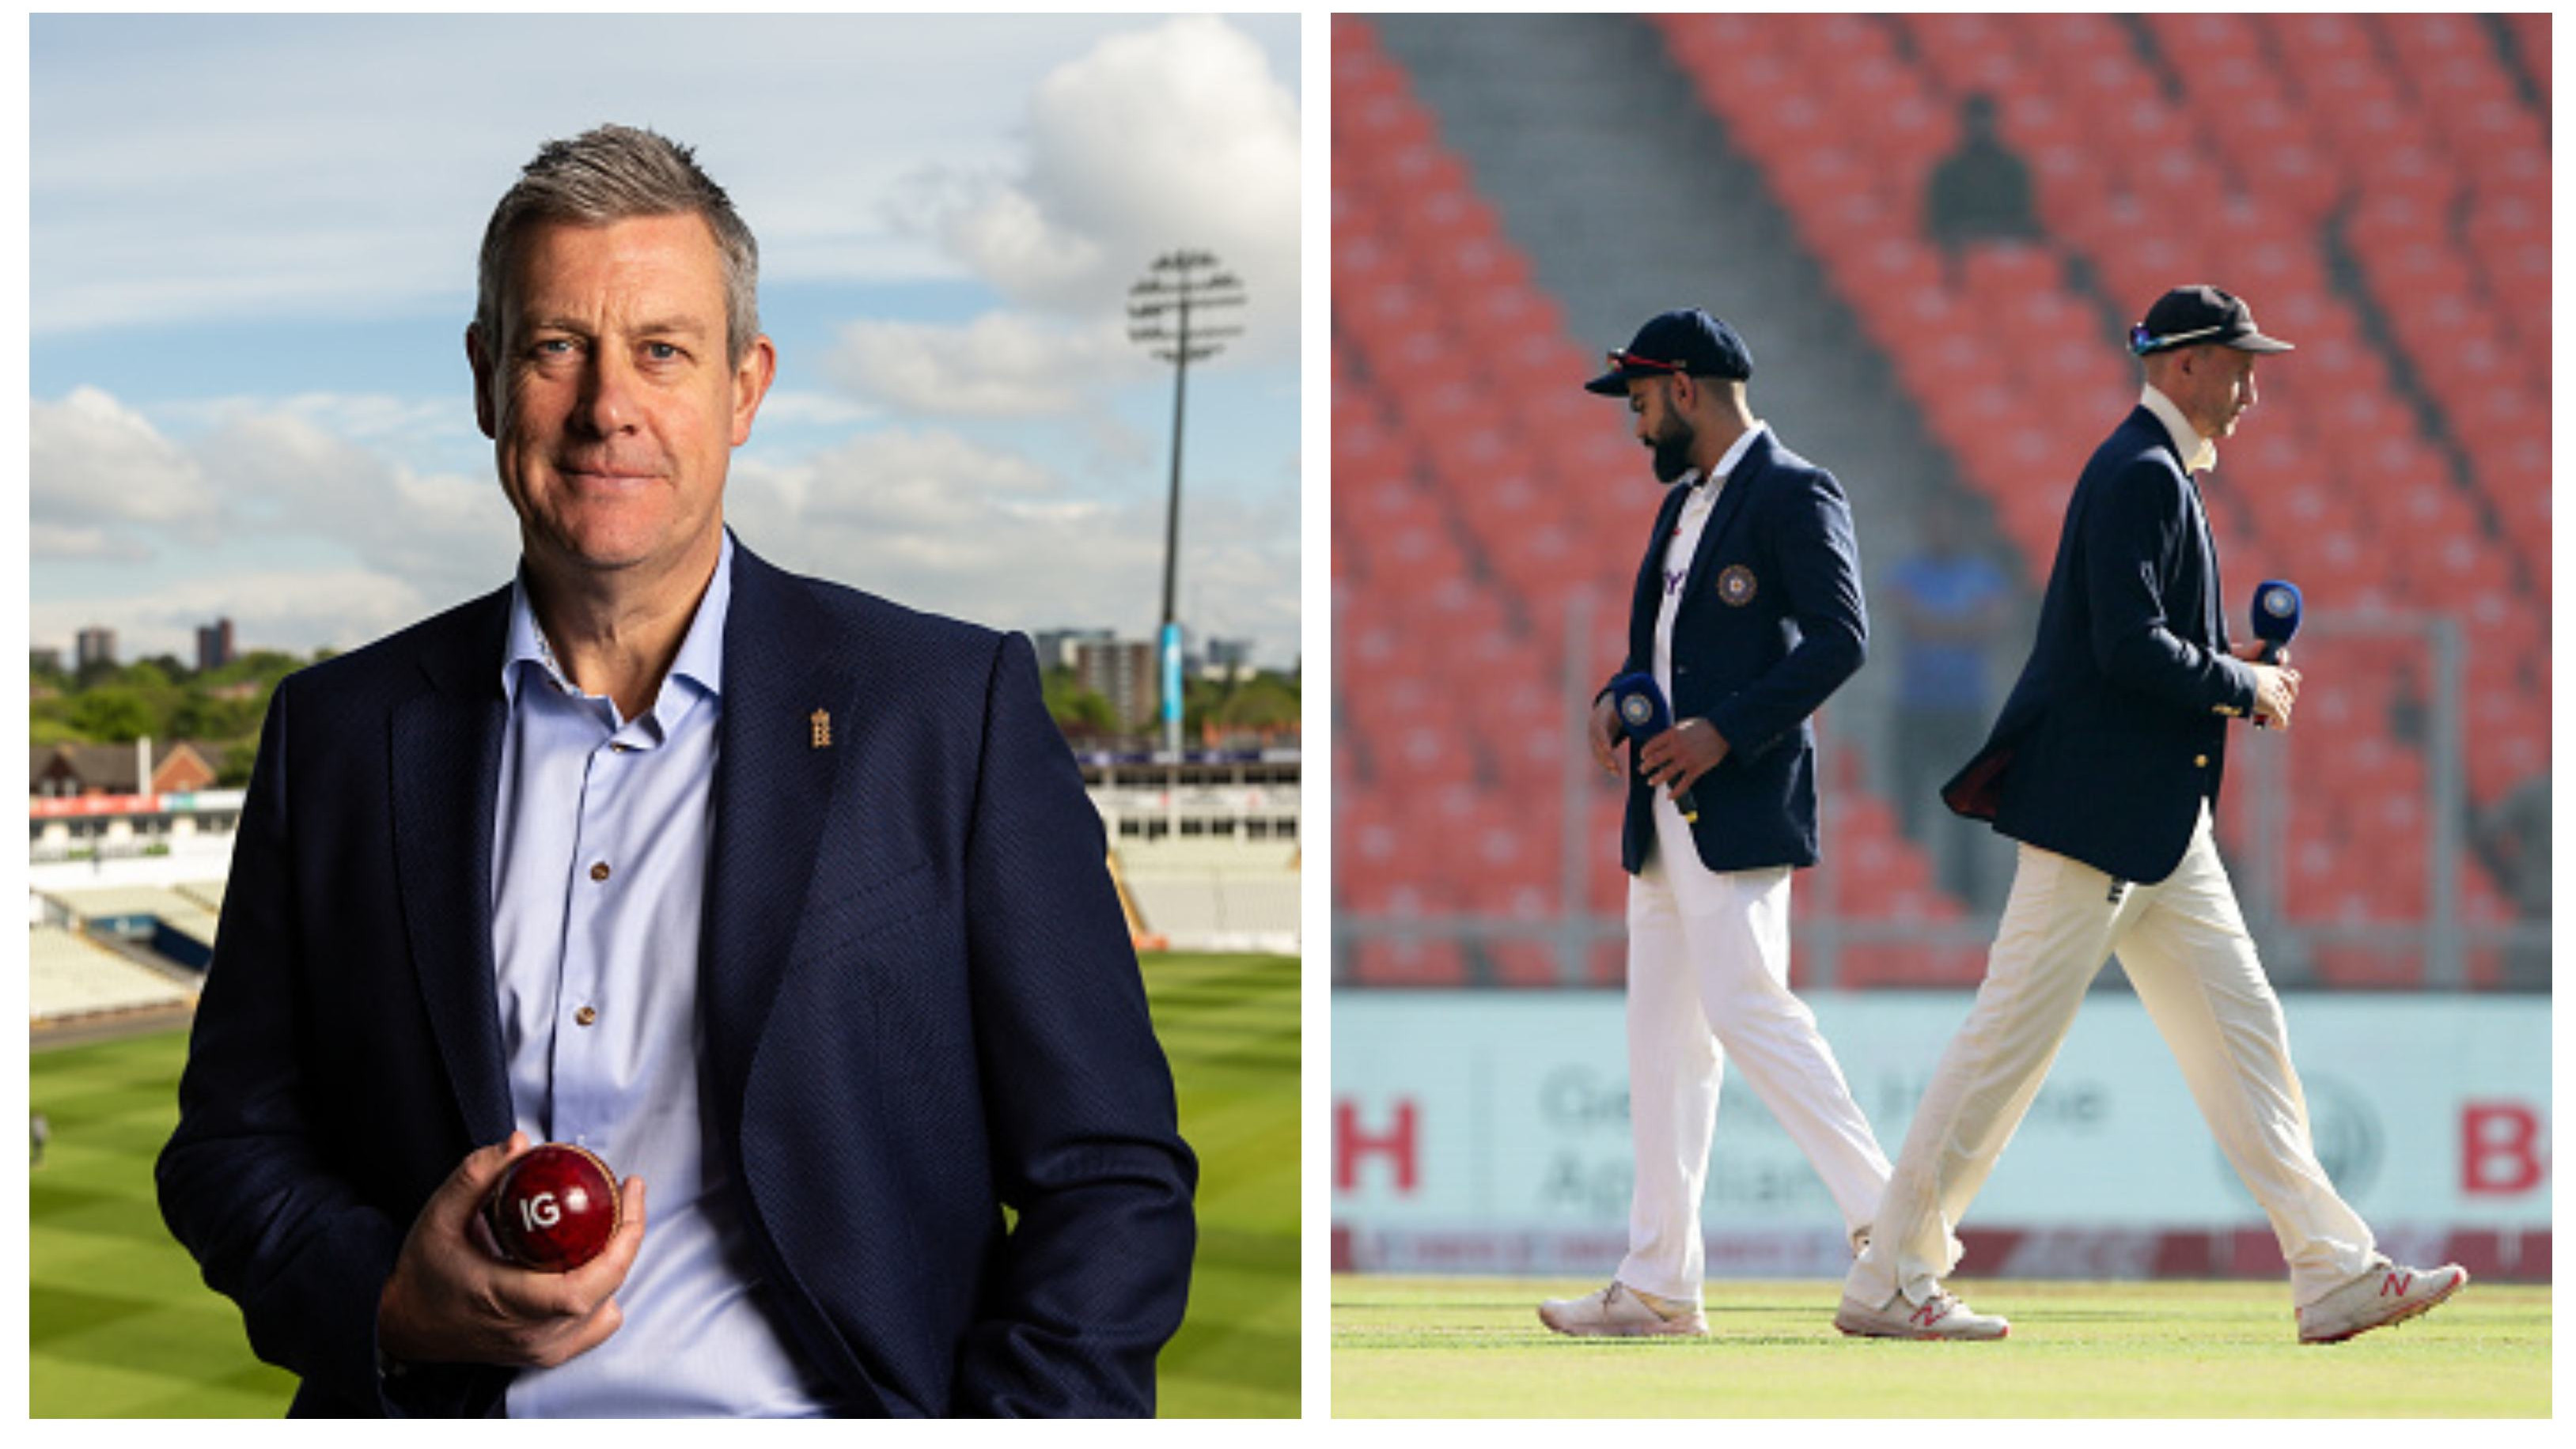 “Matches will be where they are”: Ashley Giles denies altering schedule to accommodate IPL restart